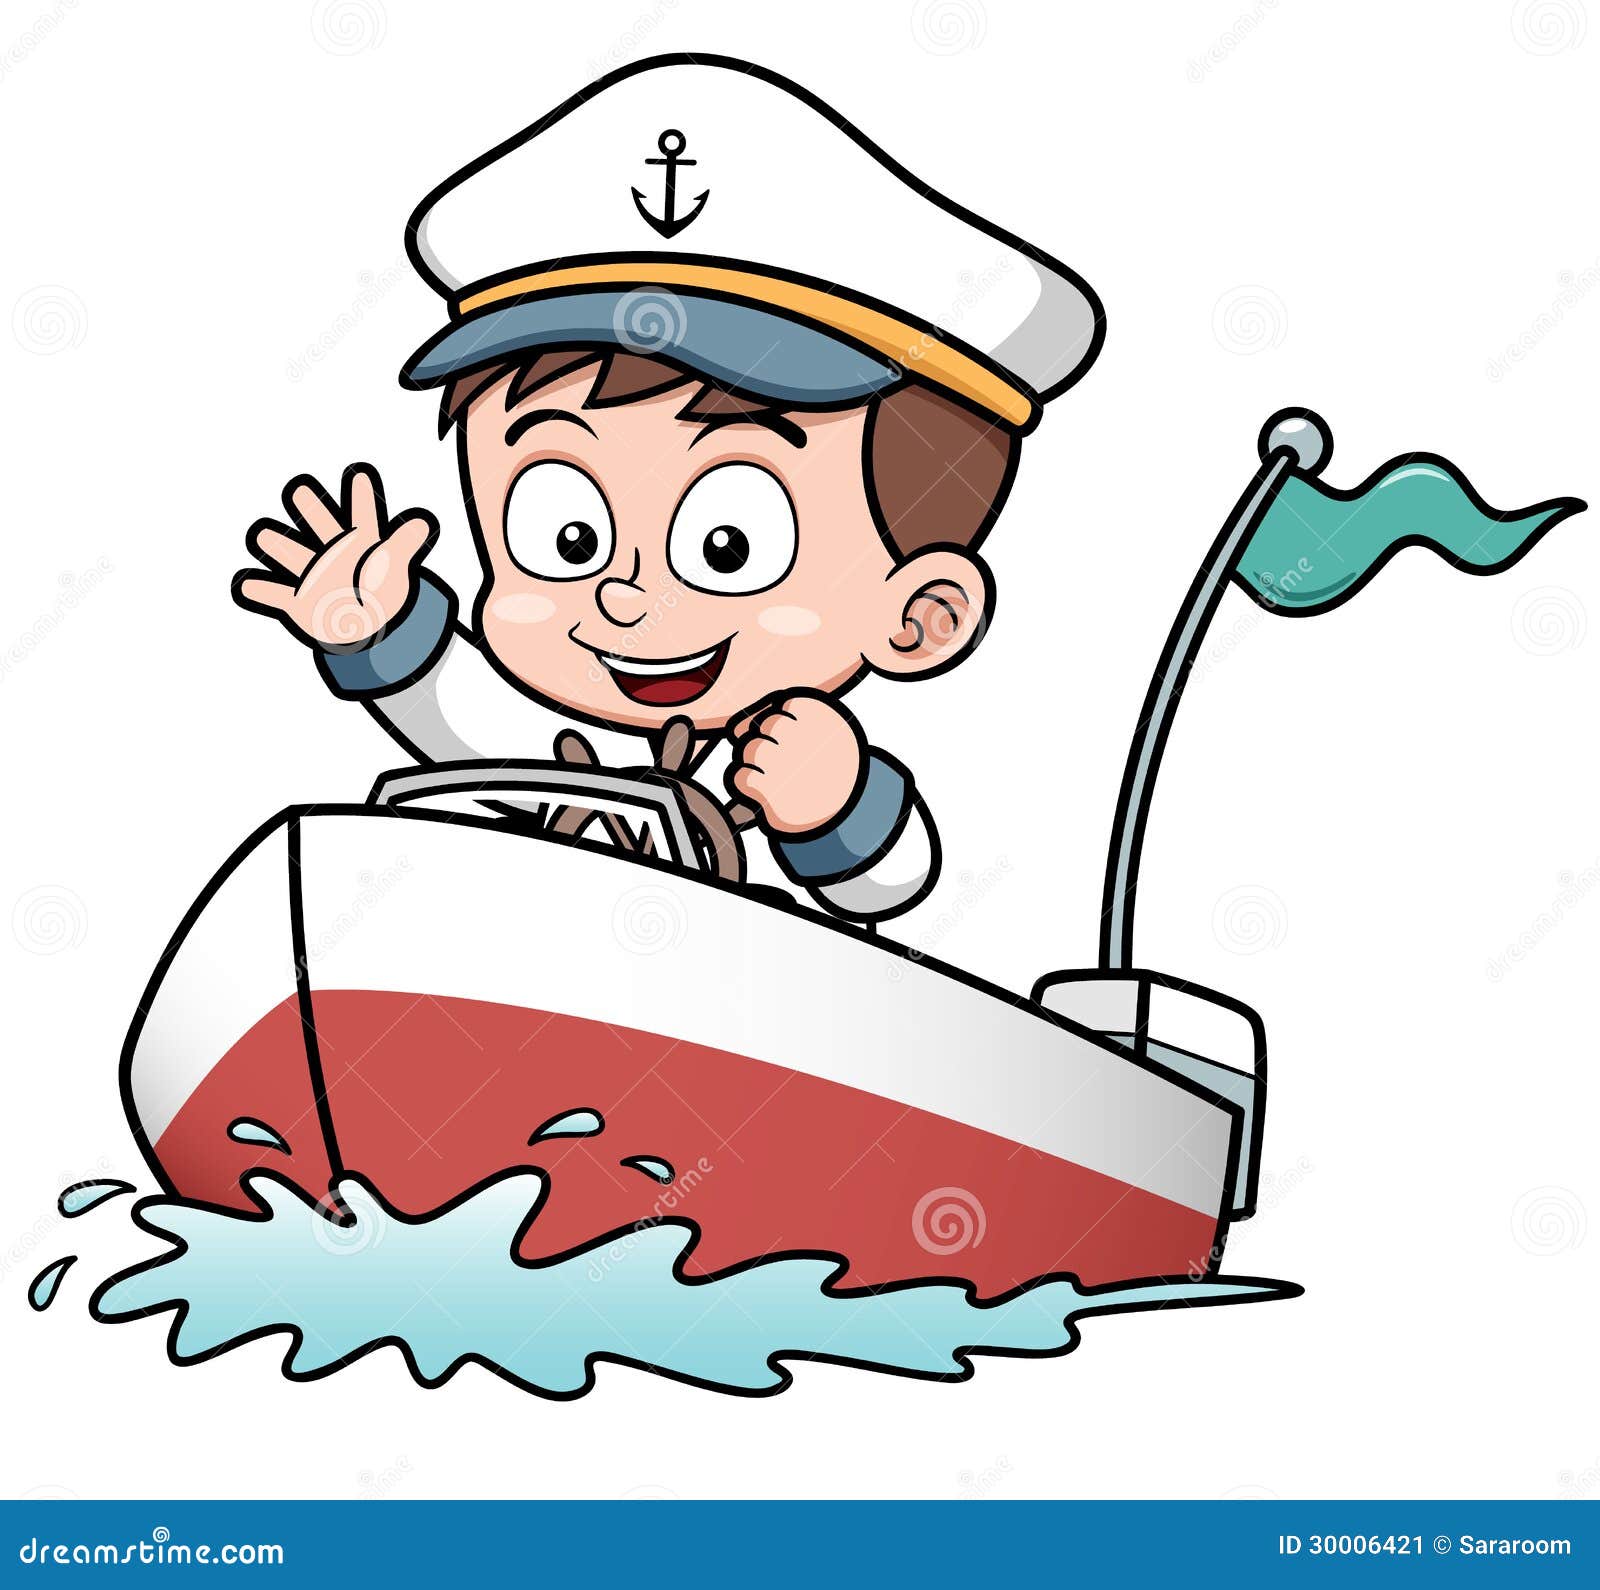 clipart boat on water - photo #26